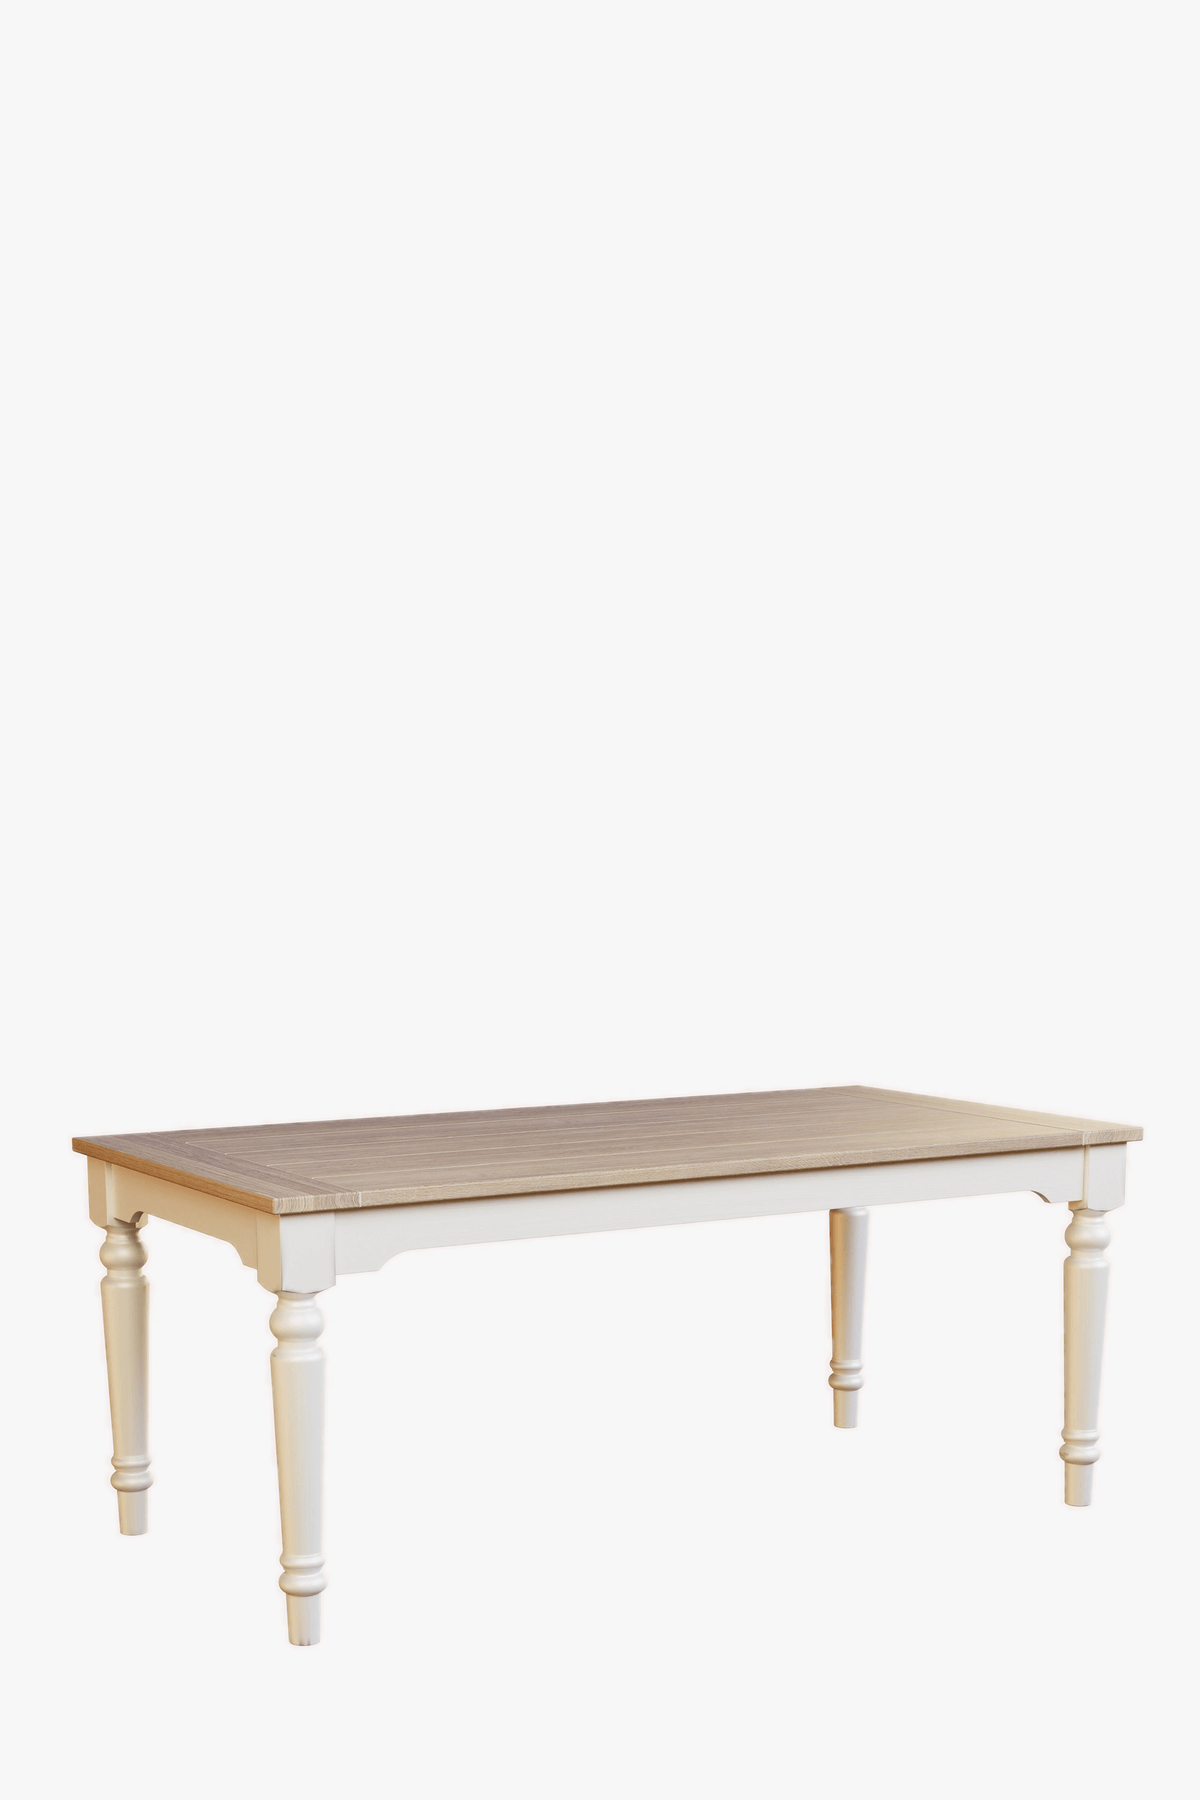 Dorset Fixed Dining Table